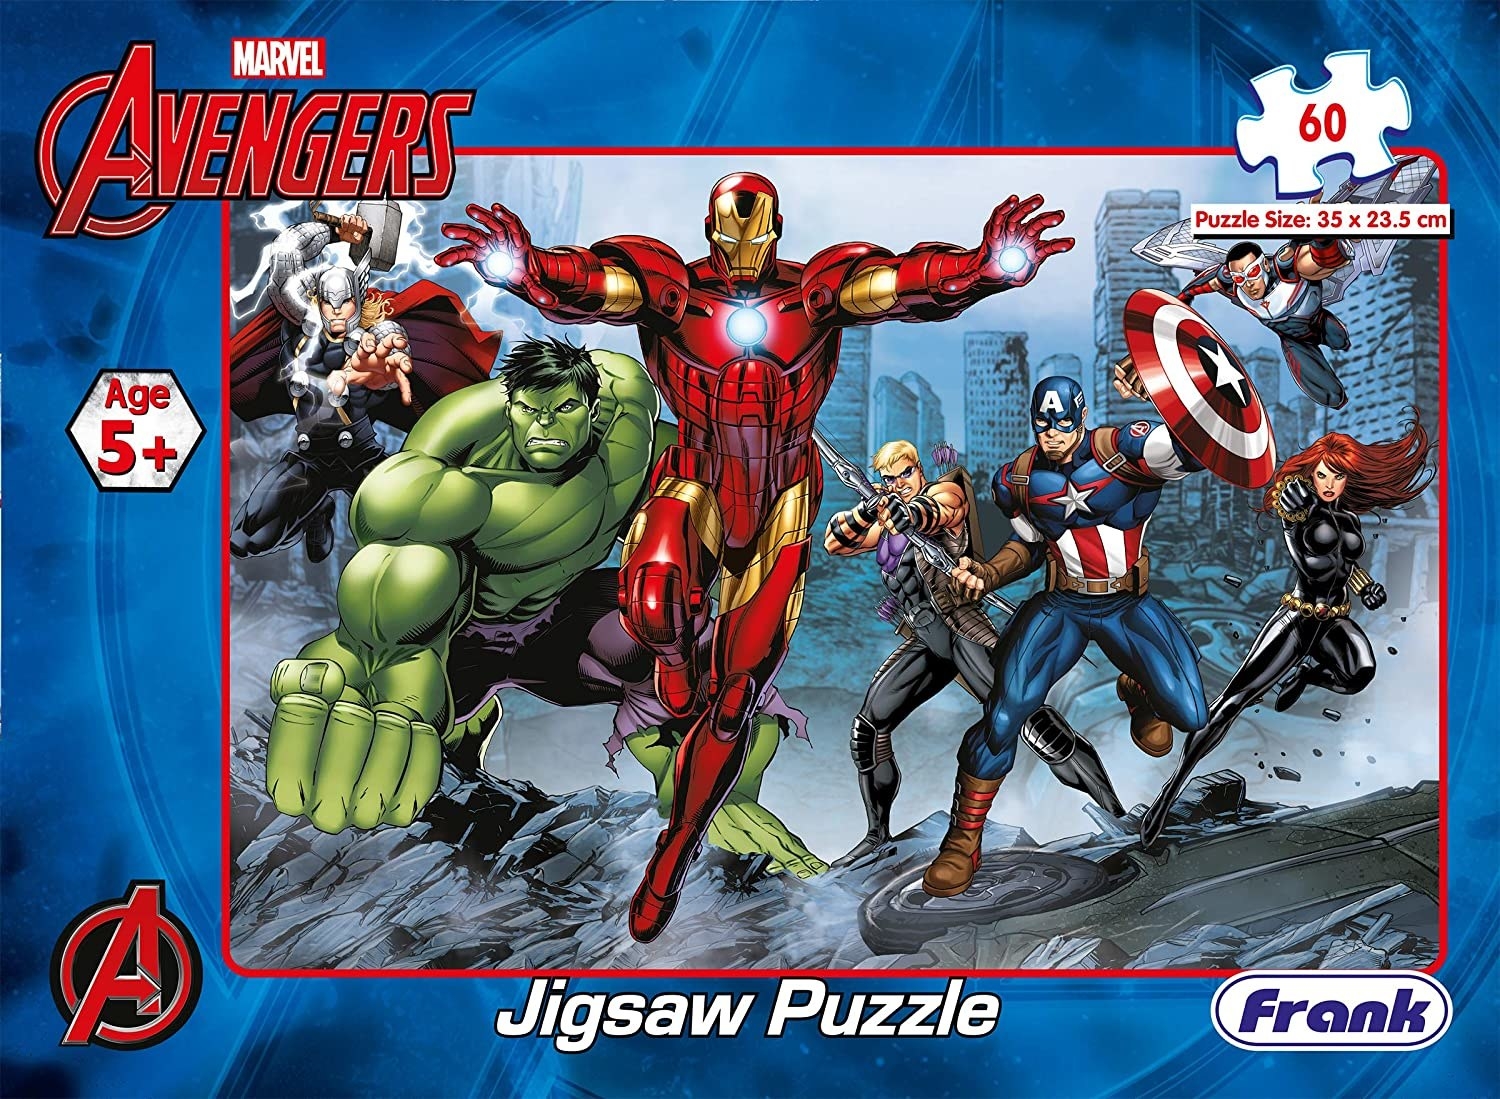 A mid-battle jigsaw puzzle scene with Thor, Hulk, Ironman, Hawkeye, Captain America, Black Widow and Falcon.